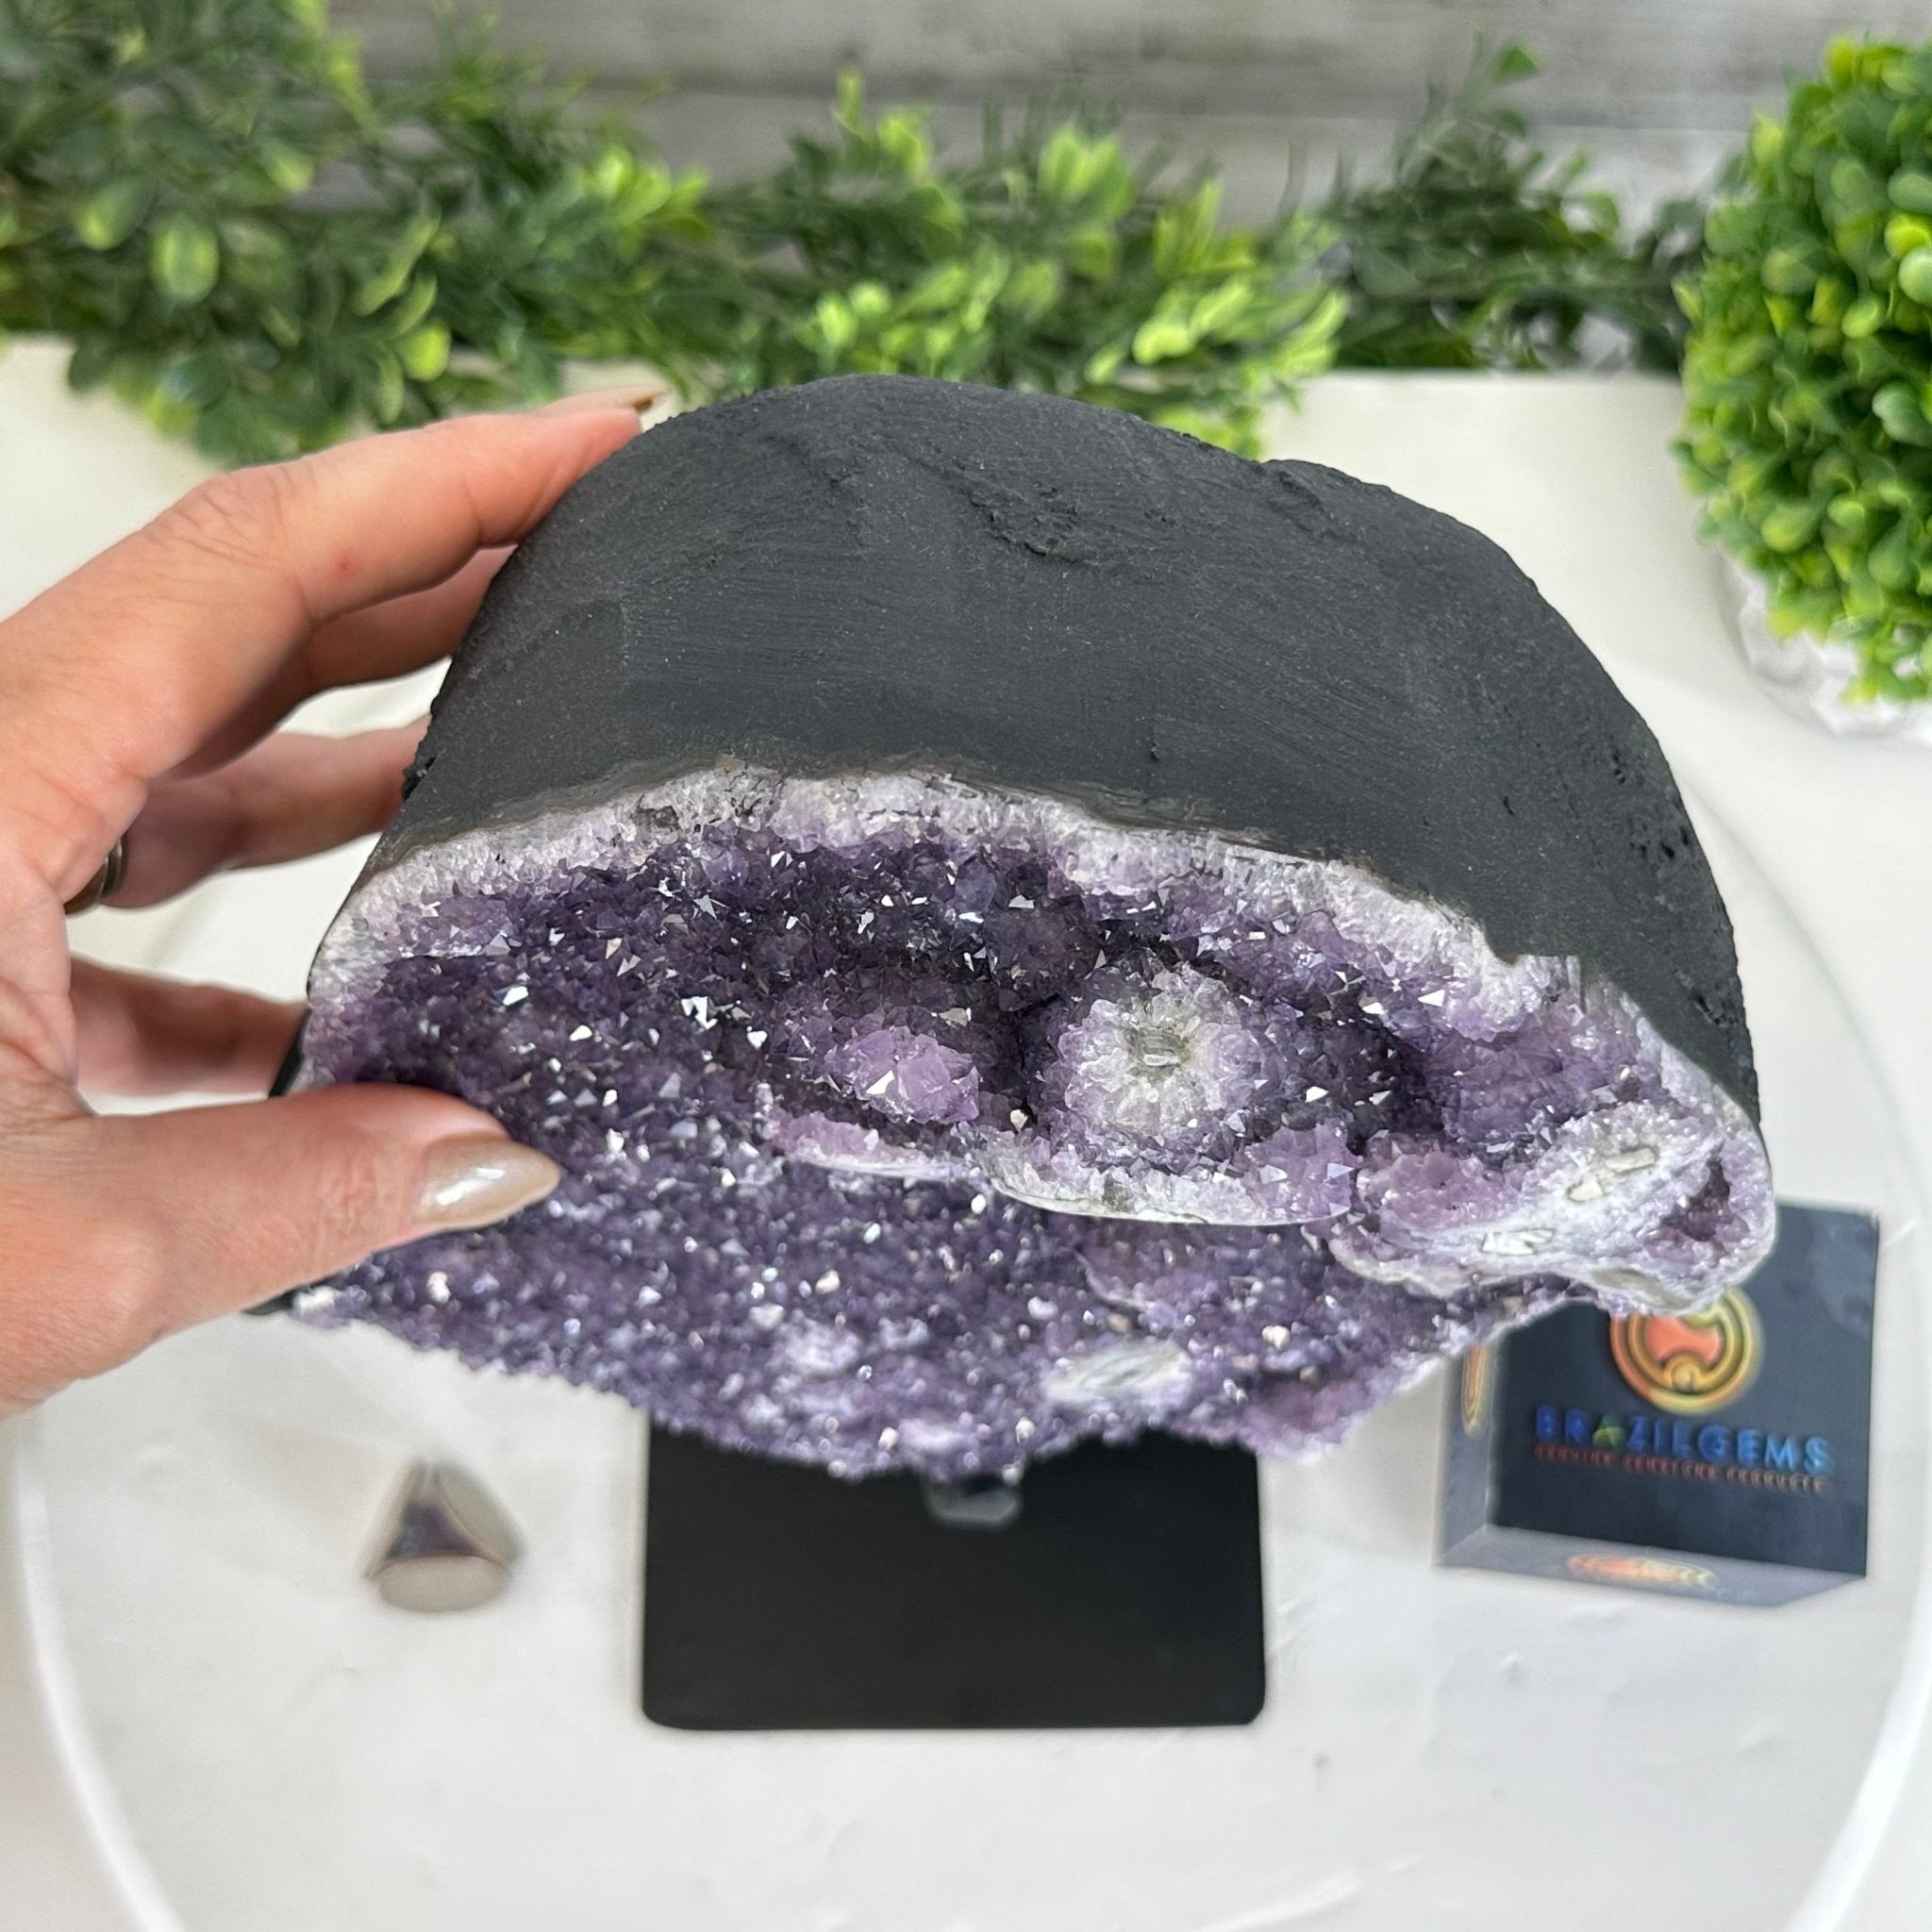 Quality Amethyst Cluster on a Metal Base, 12.7 lbs & 12.75" Tall #5491 - 0044 - Brazil GemsBrazil GemsQuality Amethyst Cluster on a Metal Base, 12.7 lbs & 12.75" Tall #5491 - 0044Clusters on Fixed Bases5491 - 0044